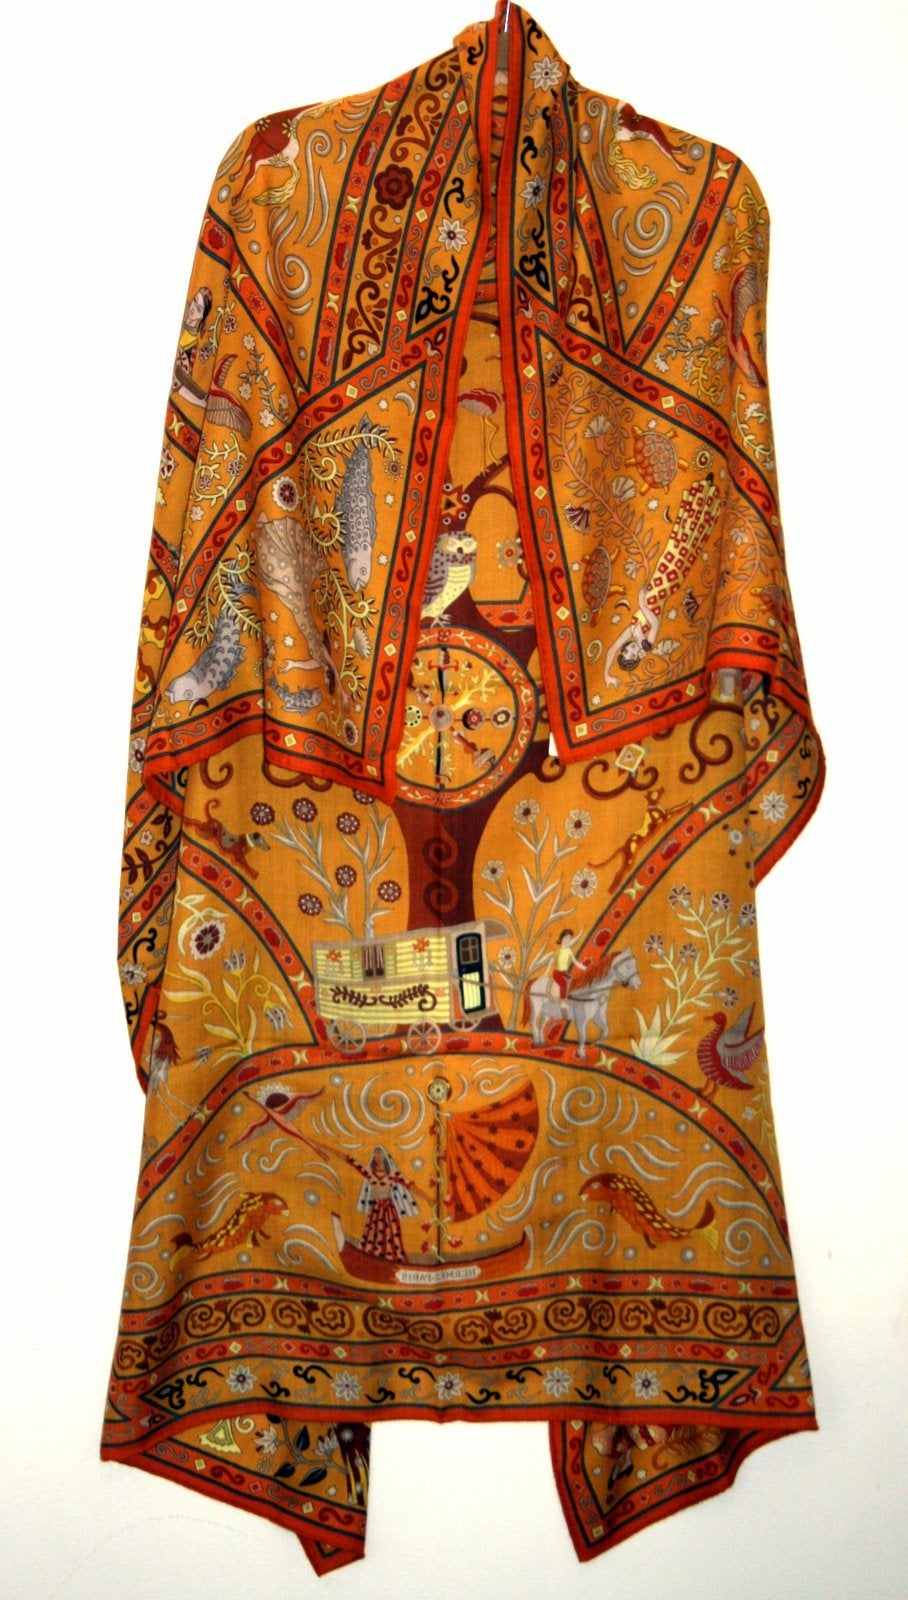 Pristine and never worn, this Hermès Saffron Peuple du Vent Cashmere and Silk GM Shawl still has the tag attached.    The Christine Henry design features an intriguing assortment of bohemian musicians, performers and animals on a golden mustard